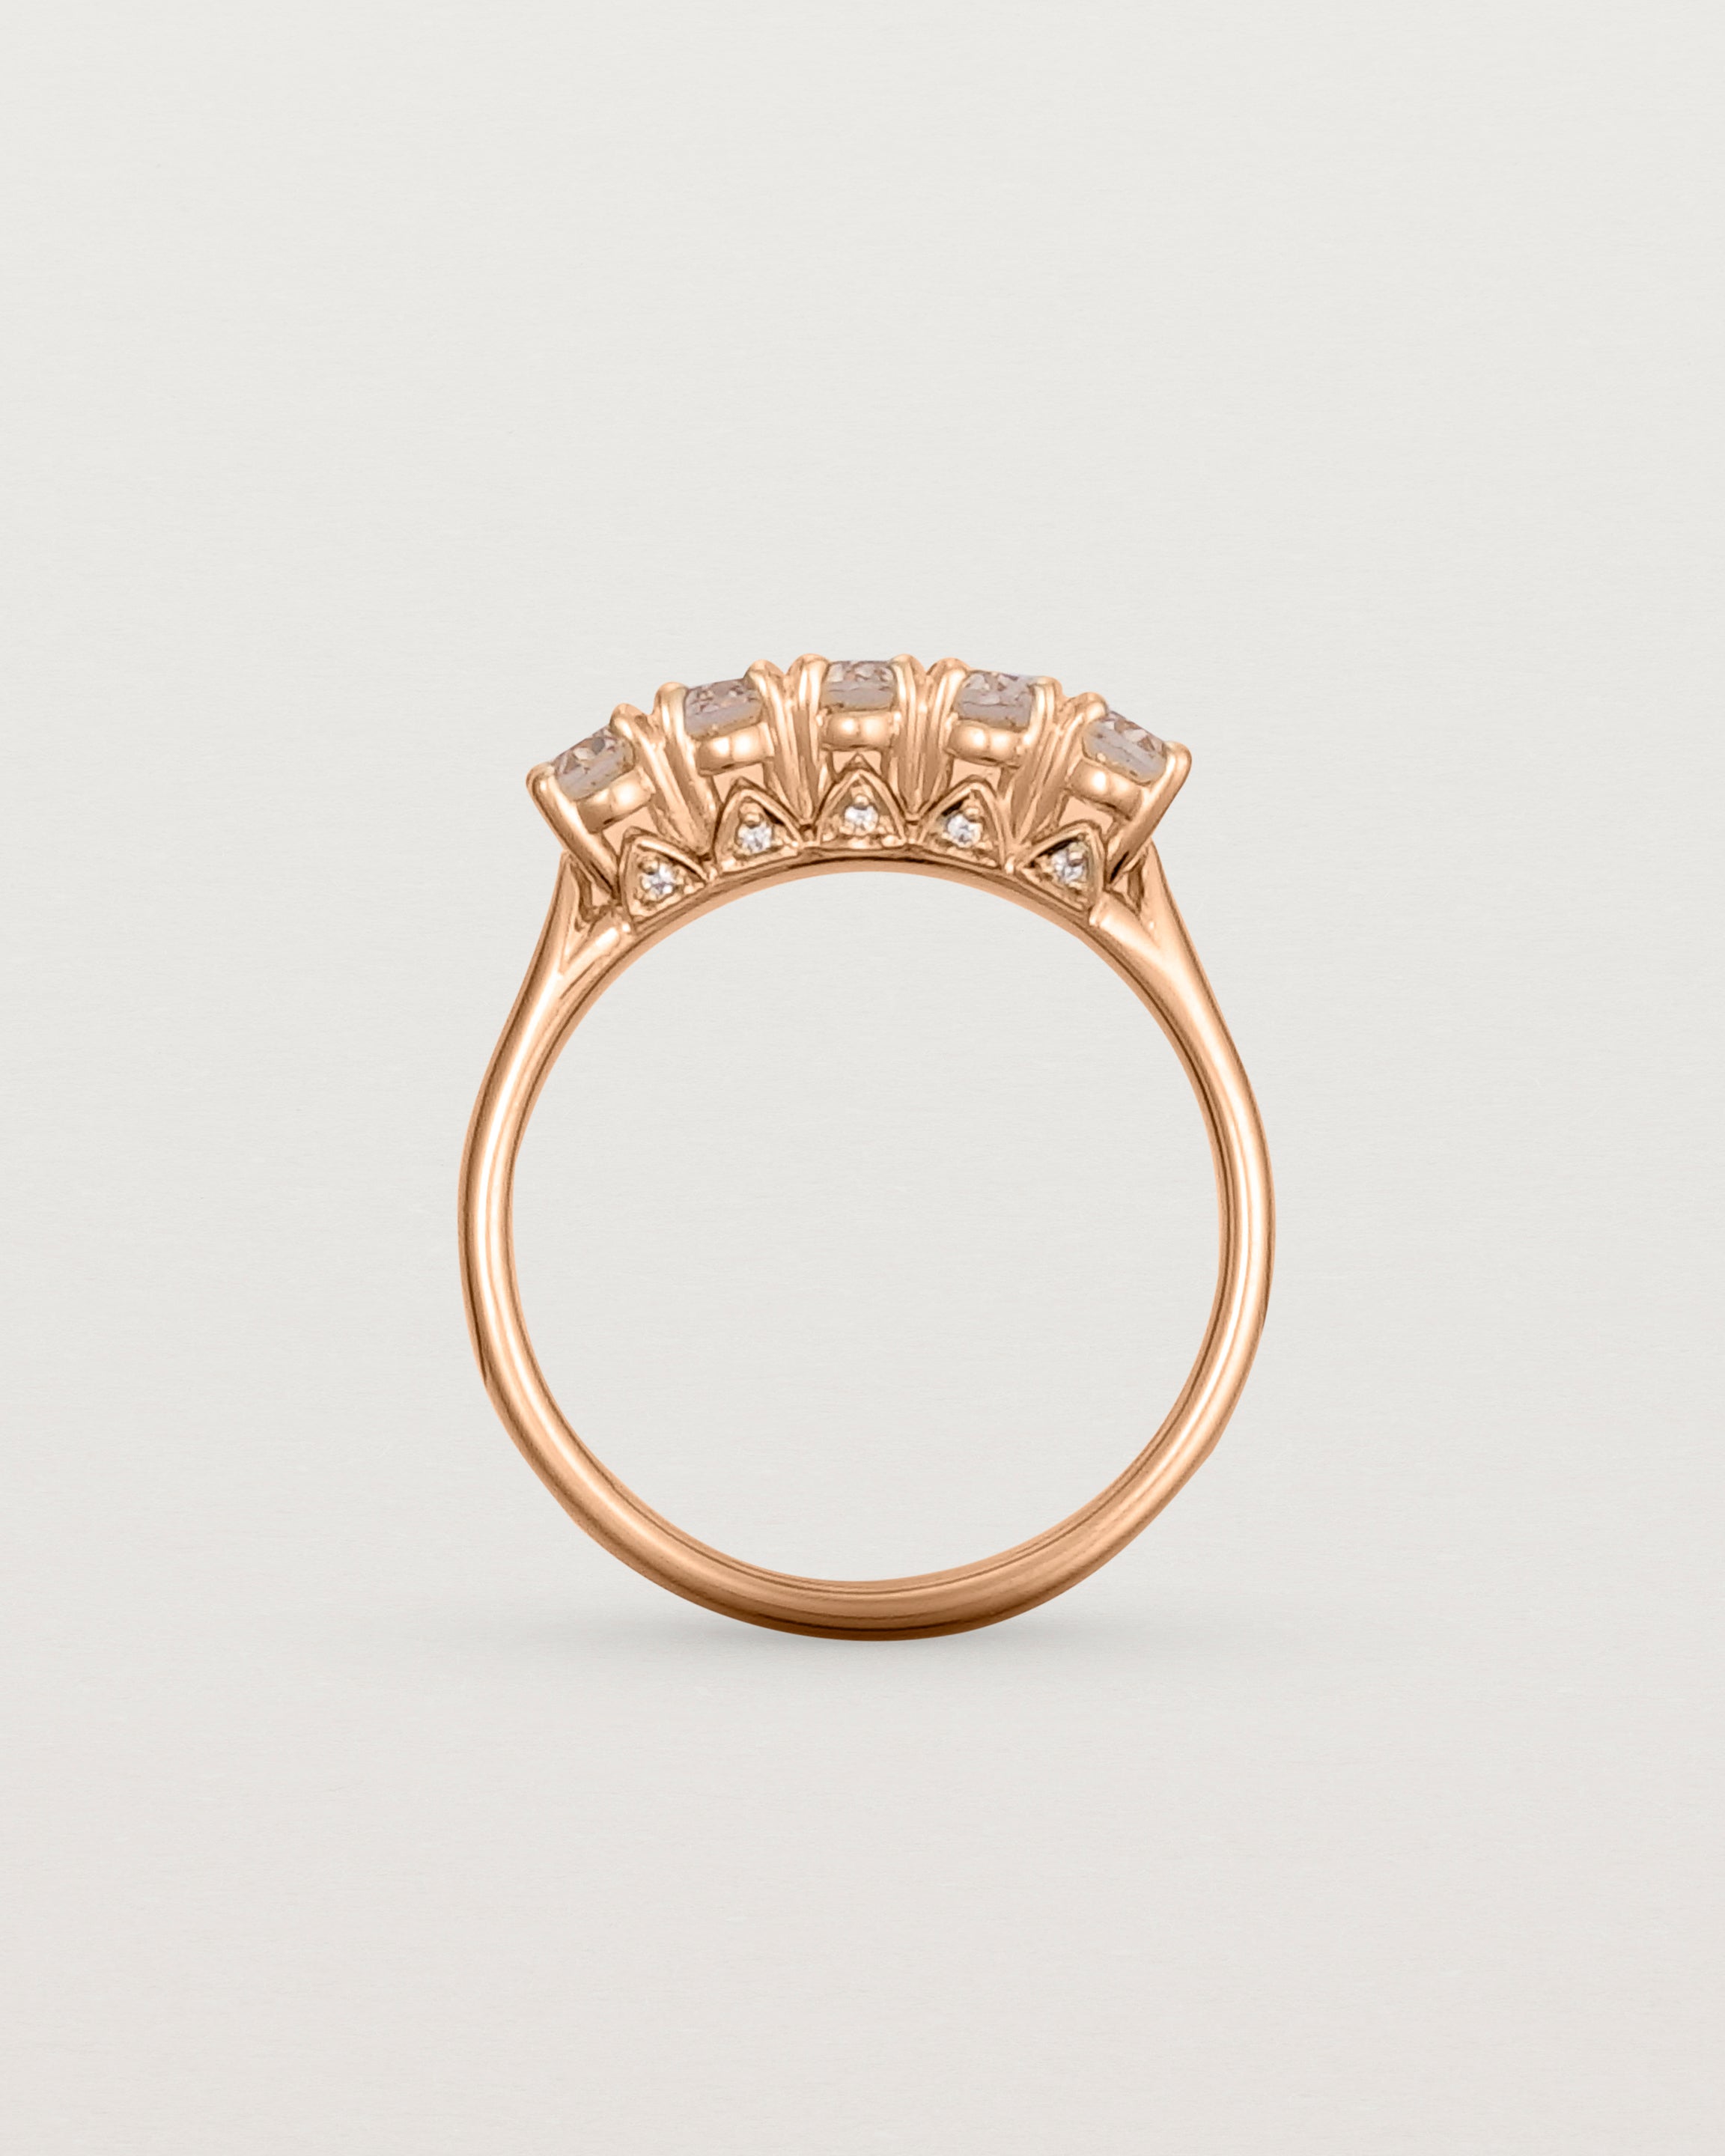 Standing view of the Fiore Wrap Ring | Savannah Sunstone | Rose Gold.